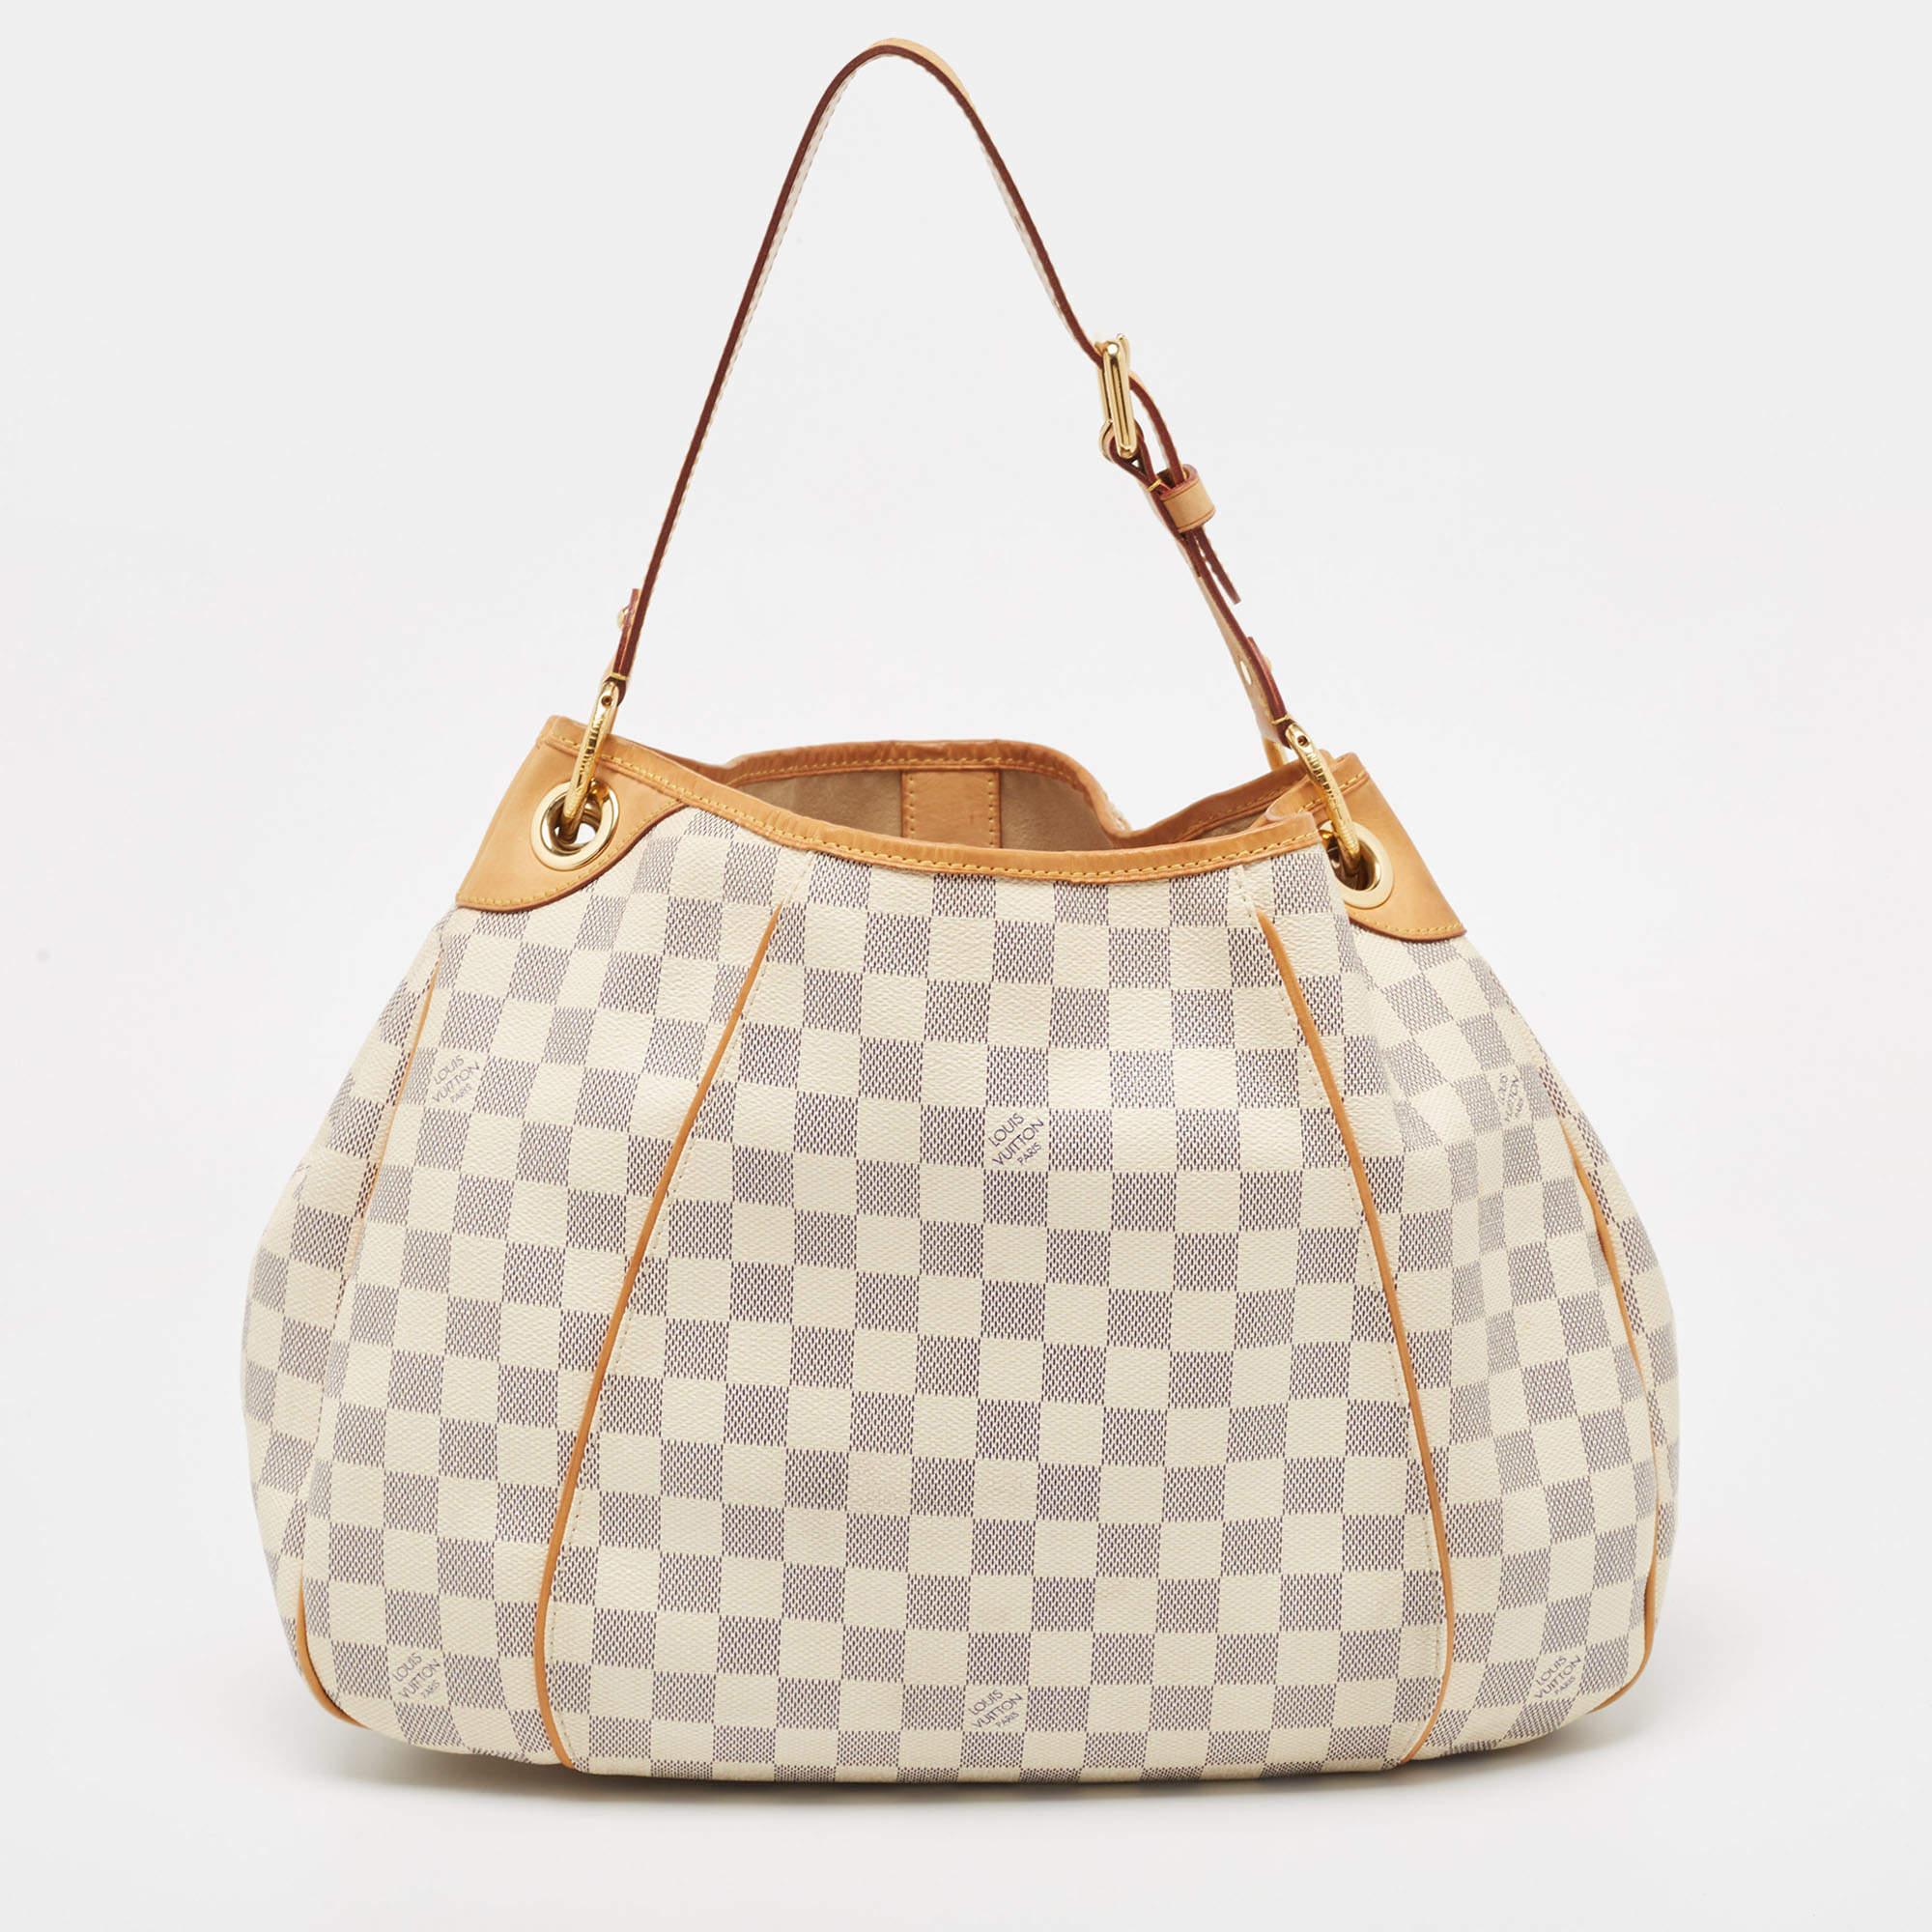 Add this Galliera bag by Louis Vuitton to your collection today! It is crafted with the signature Damier Azur canvas and leather on the exterior. It comes with a single handle, a snap button, and gold-tone hardware. The Louis Vuitton Inventeur plate